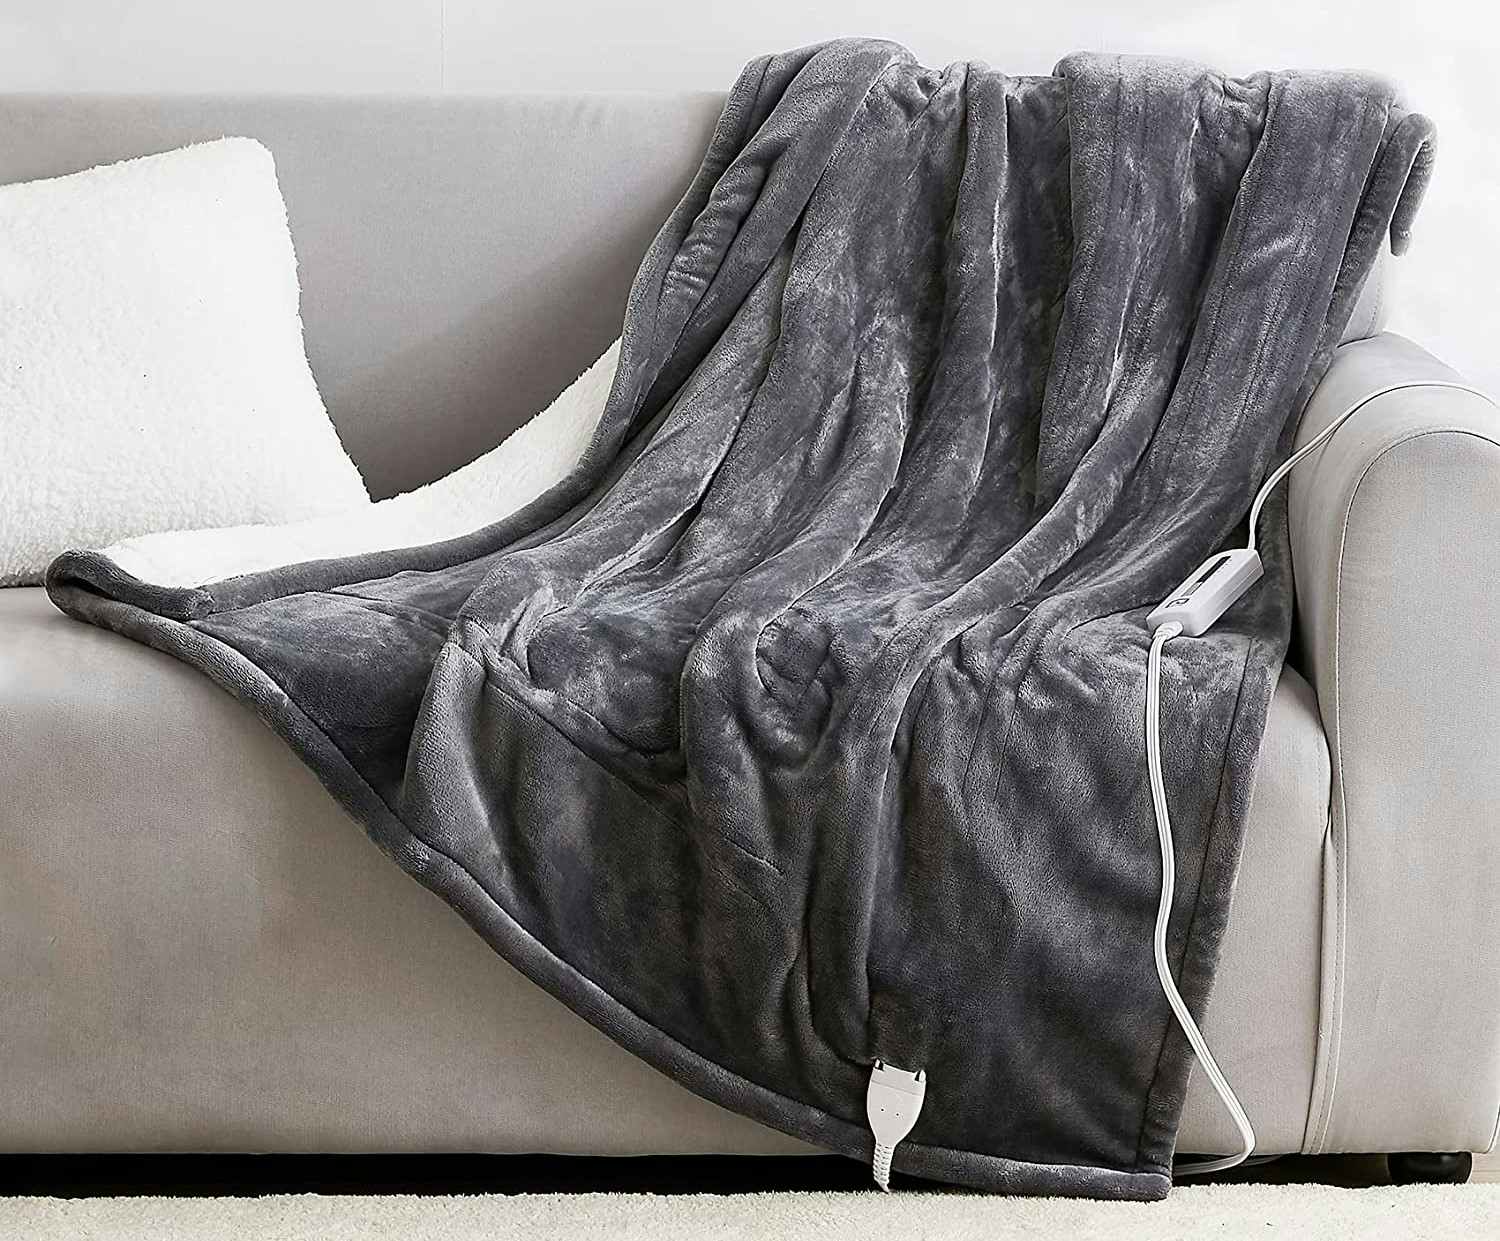 An electric blanket on a couch.